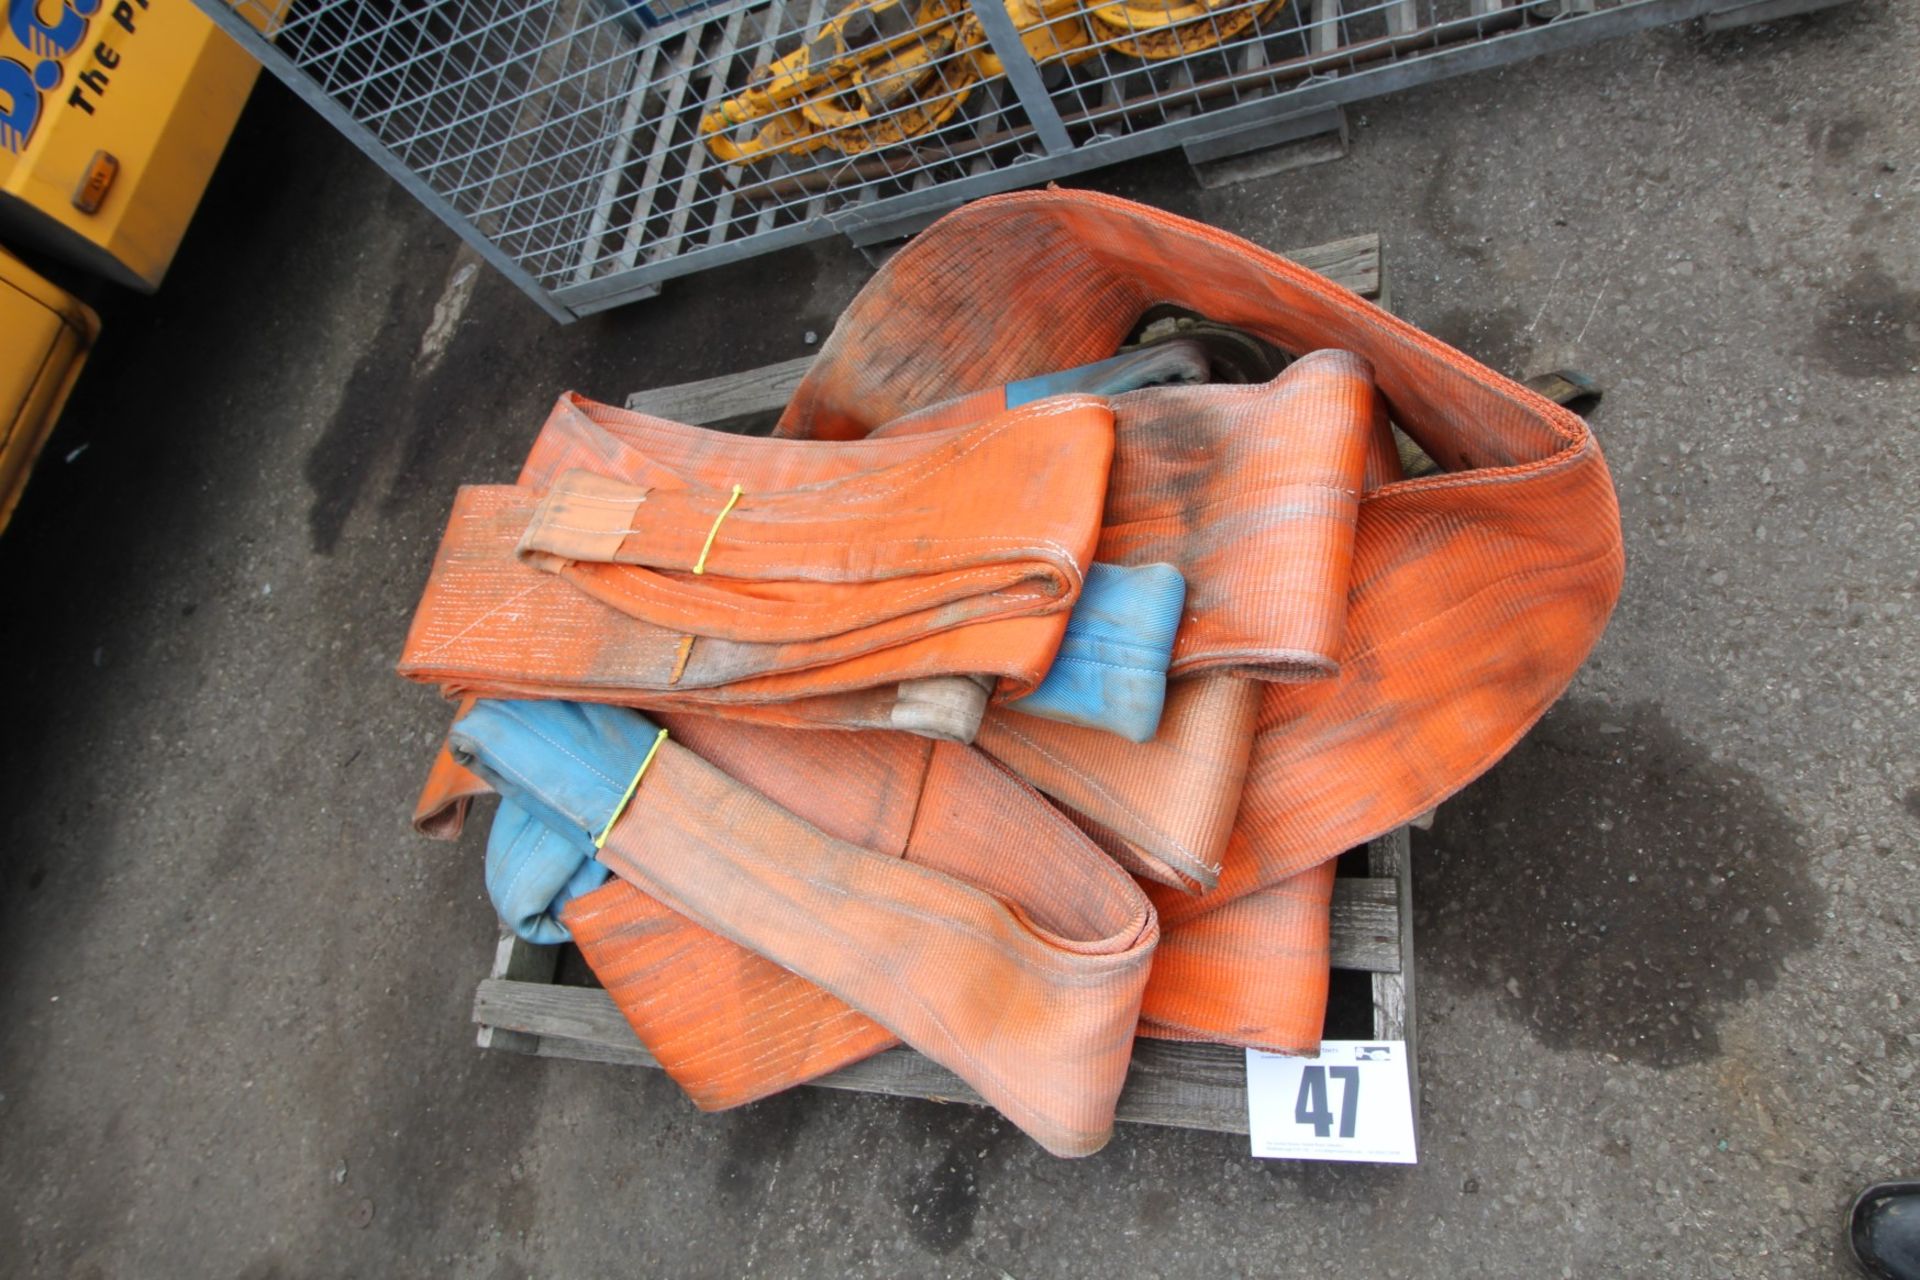 CONTENTS ON PALLET OF ORANGE LIFTING SLINGS